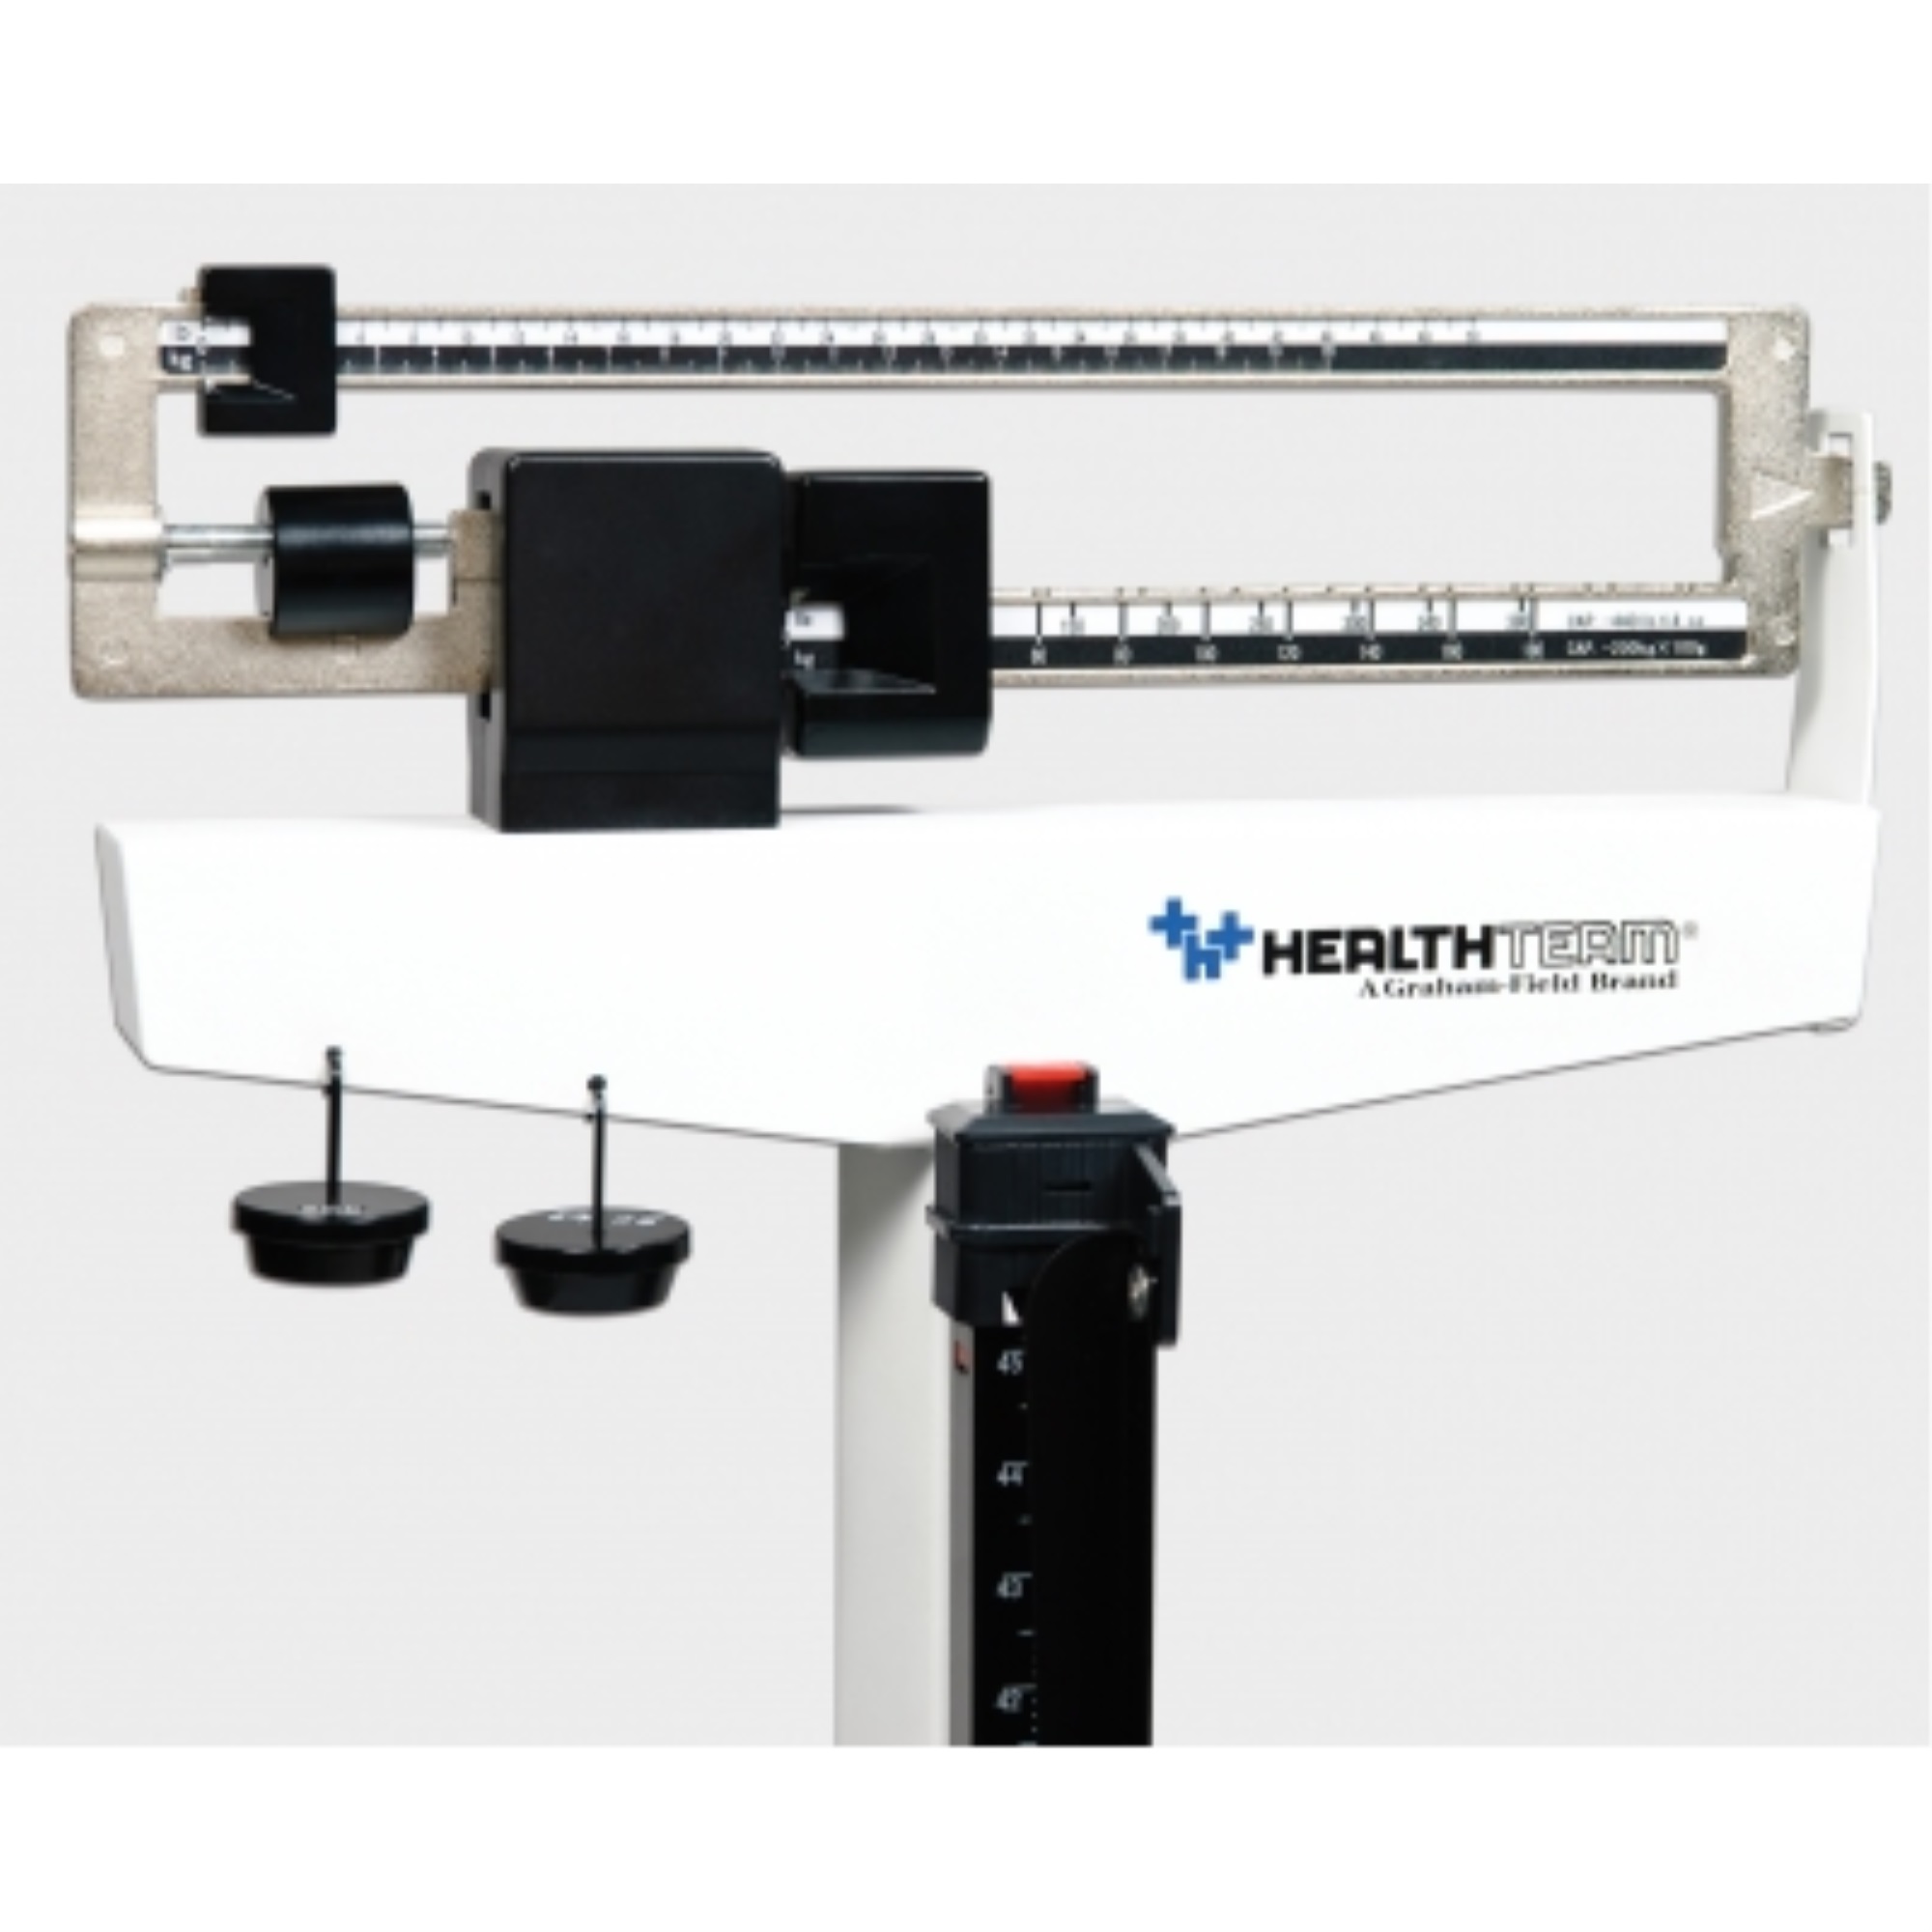 GF Health Products PHYSICIAN MEC BEAM SCALE W WH HEALTHTEAM